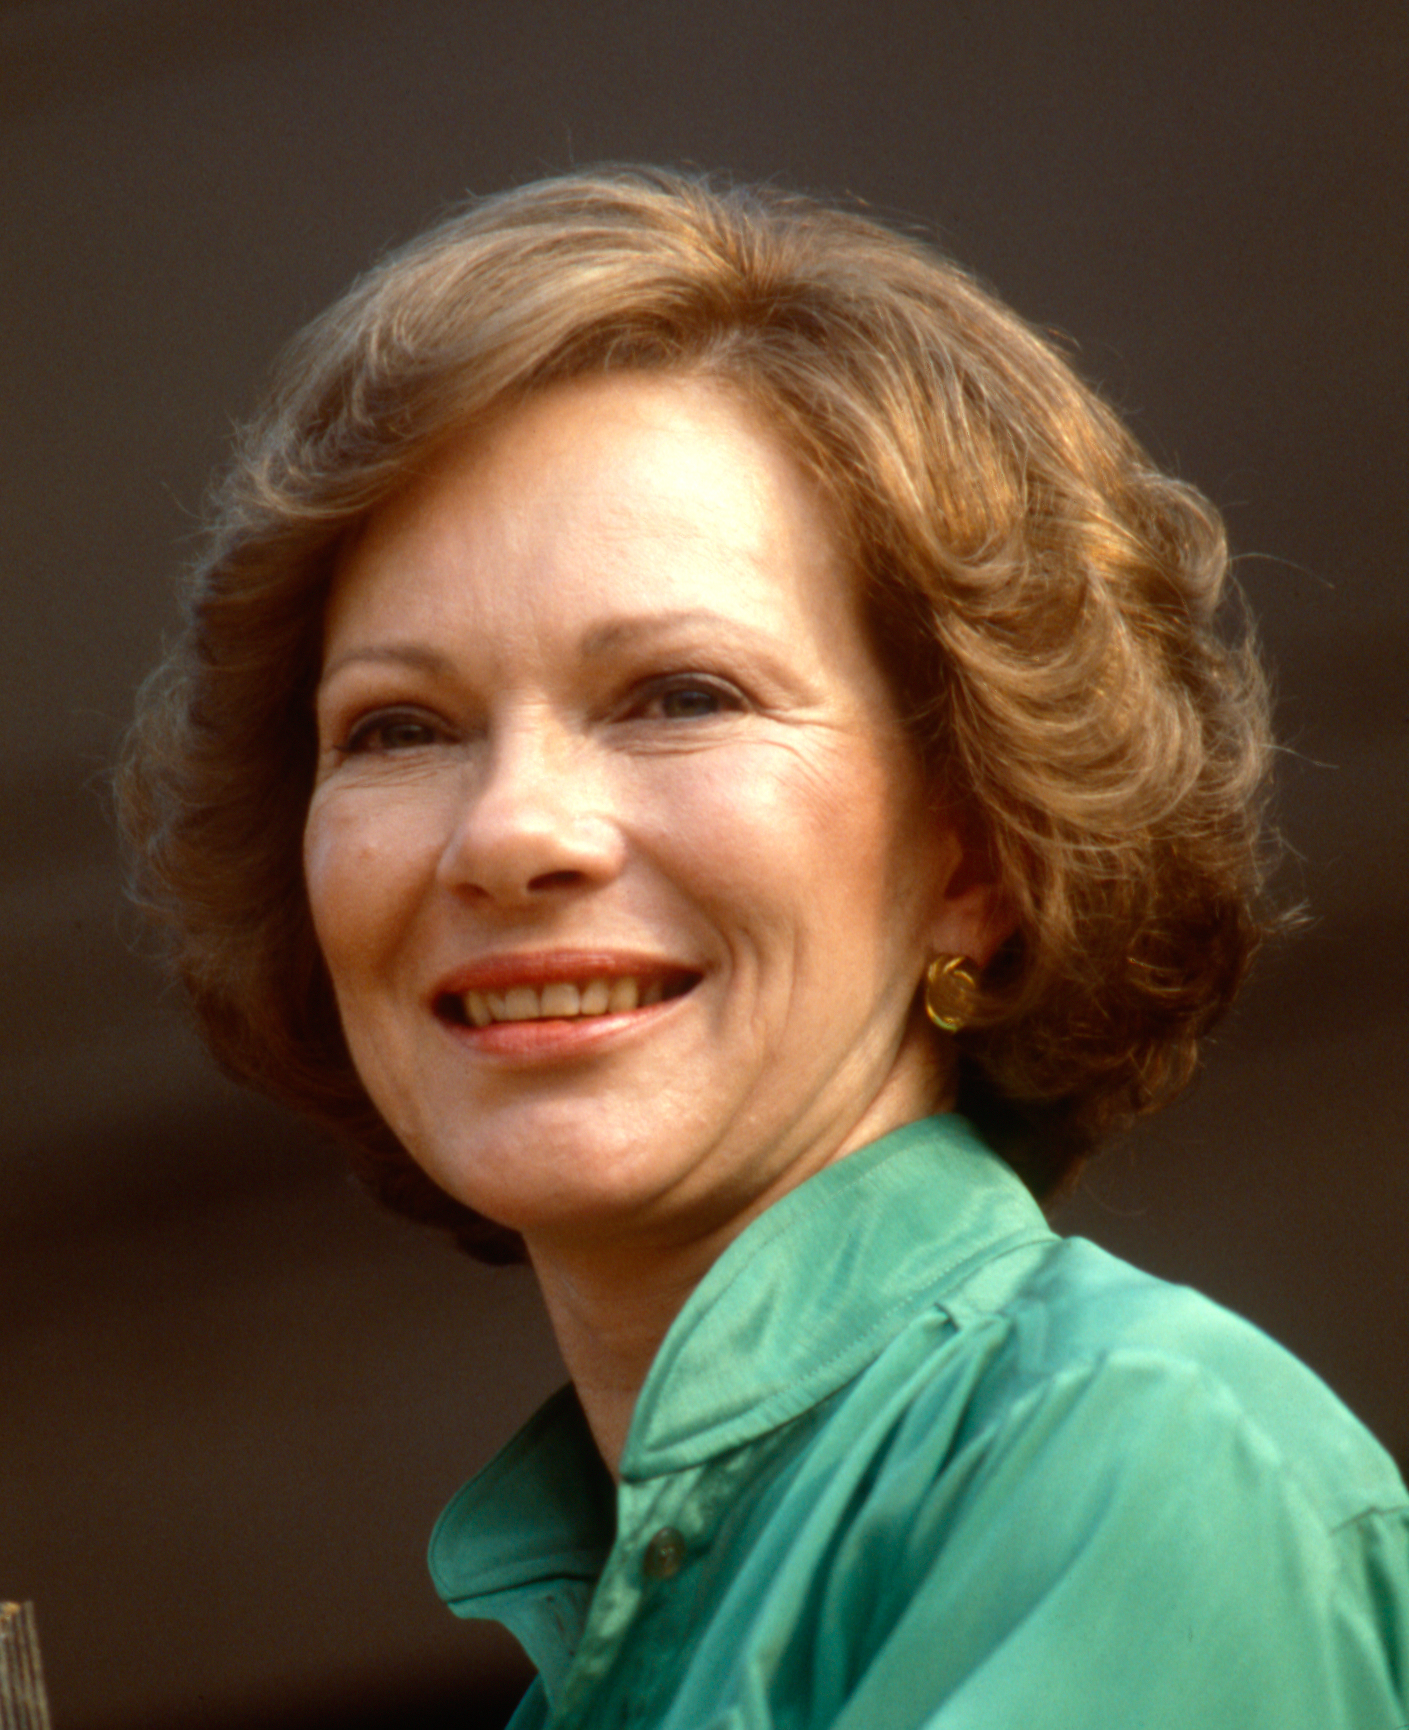 Rosalynn Carter during an unspecified event, Pine Bluff, Arkansas on July 23, 1979 | Source: Getty Images